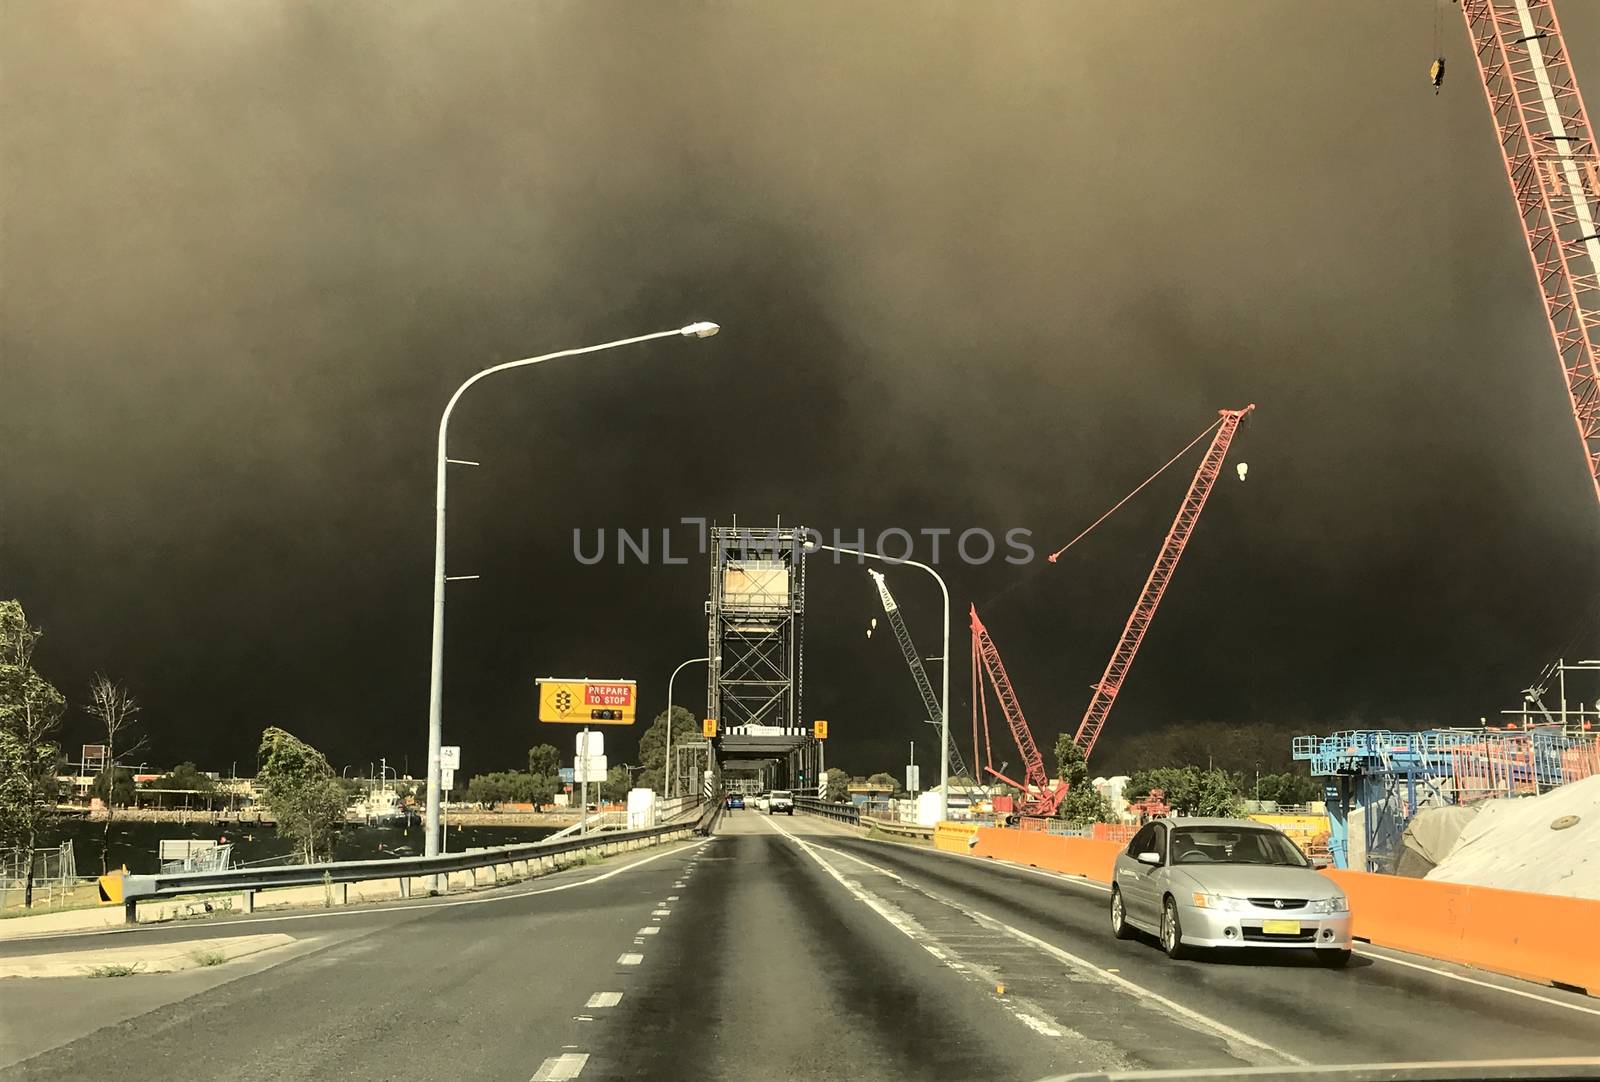 This is the beginning of the devastating bushfires in Batemans Bay on the NSW South Coast of Australia. Nealy 600 homes were lost on this day. Although the Batemans Bay greater region did not lose any lives, many have passed away since because the emotional toll it dealt.